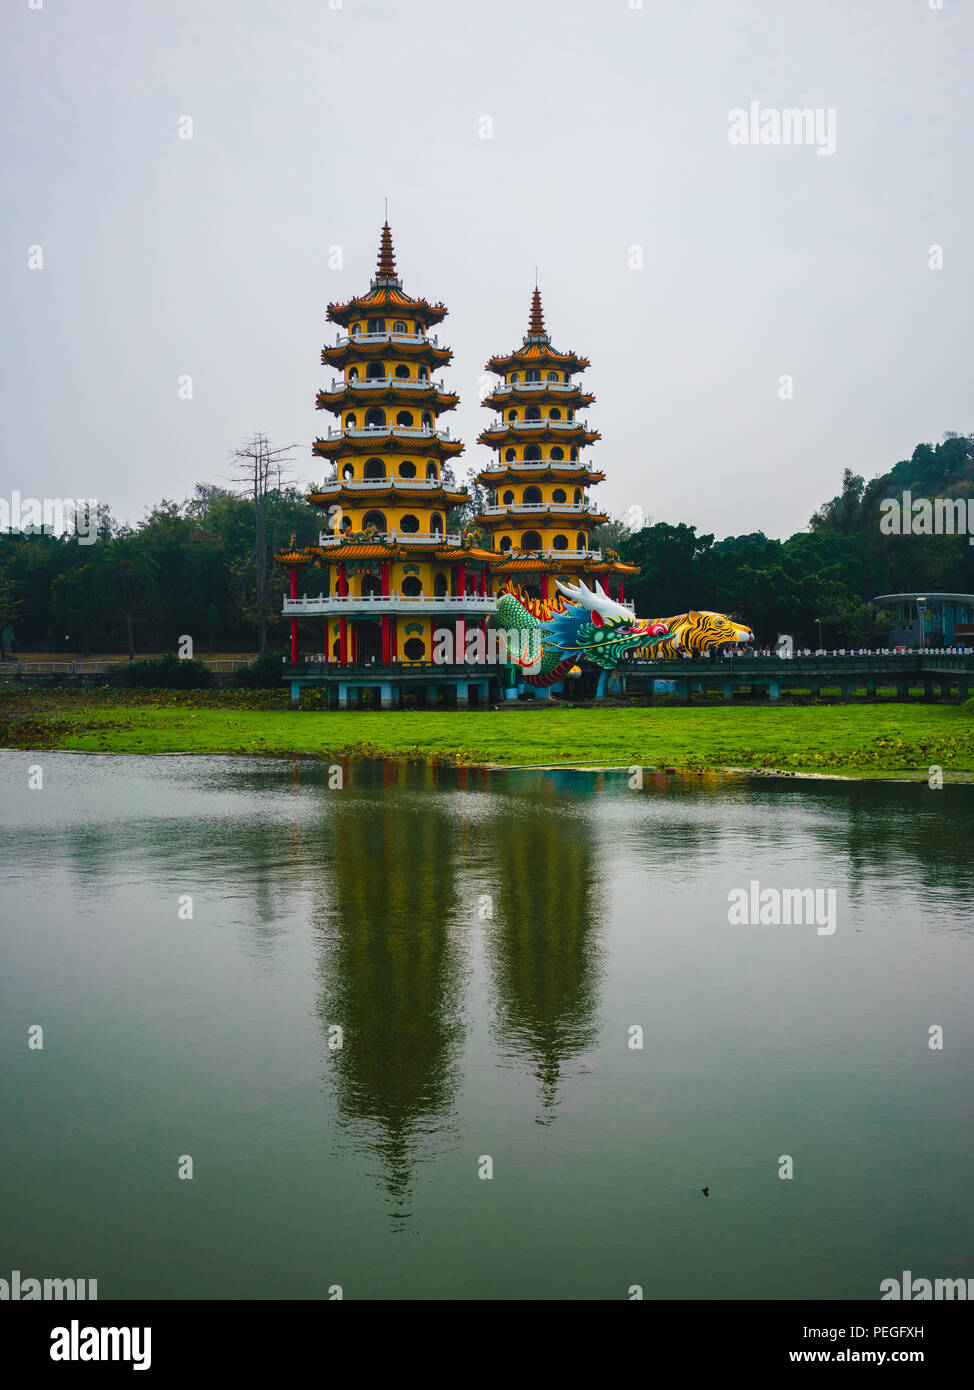 Drachen und Tiger Pagoden im Lotus Teich See in Kaohsiung, Taiwan Stockfoto